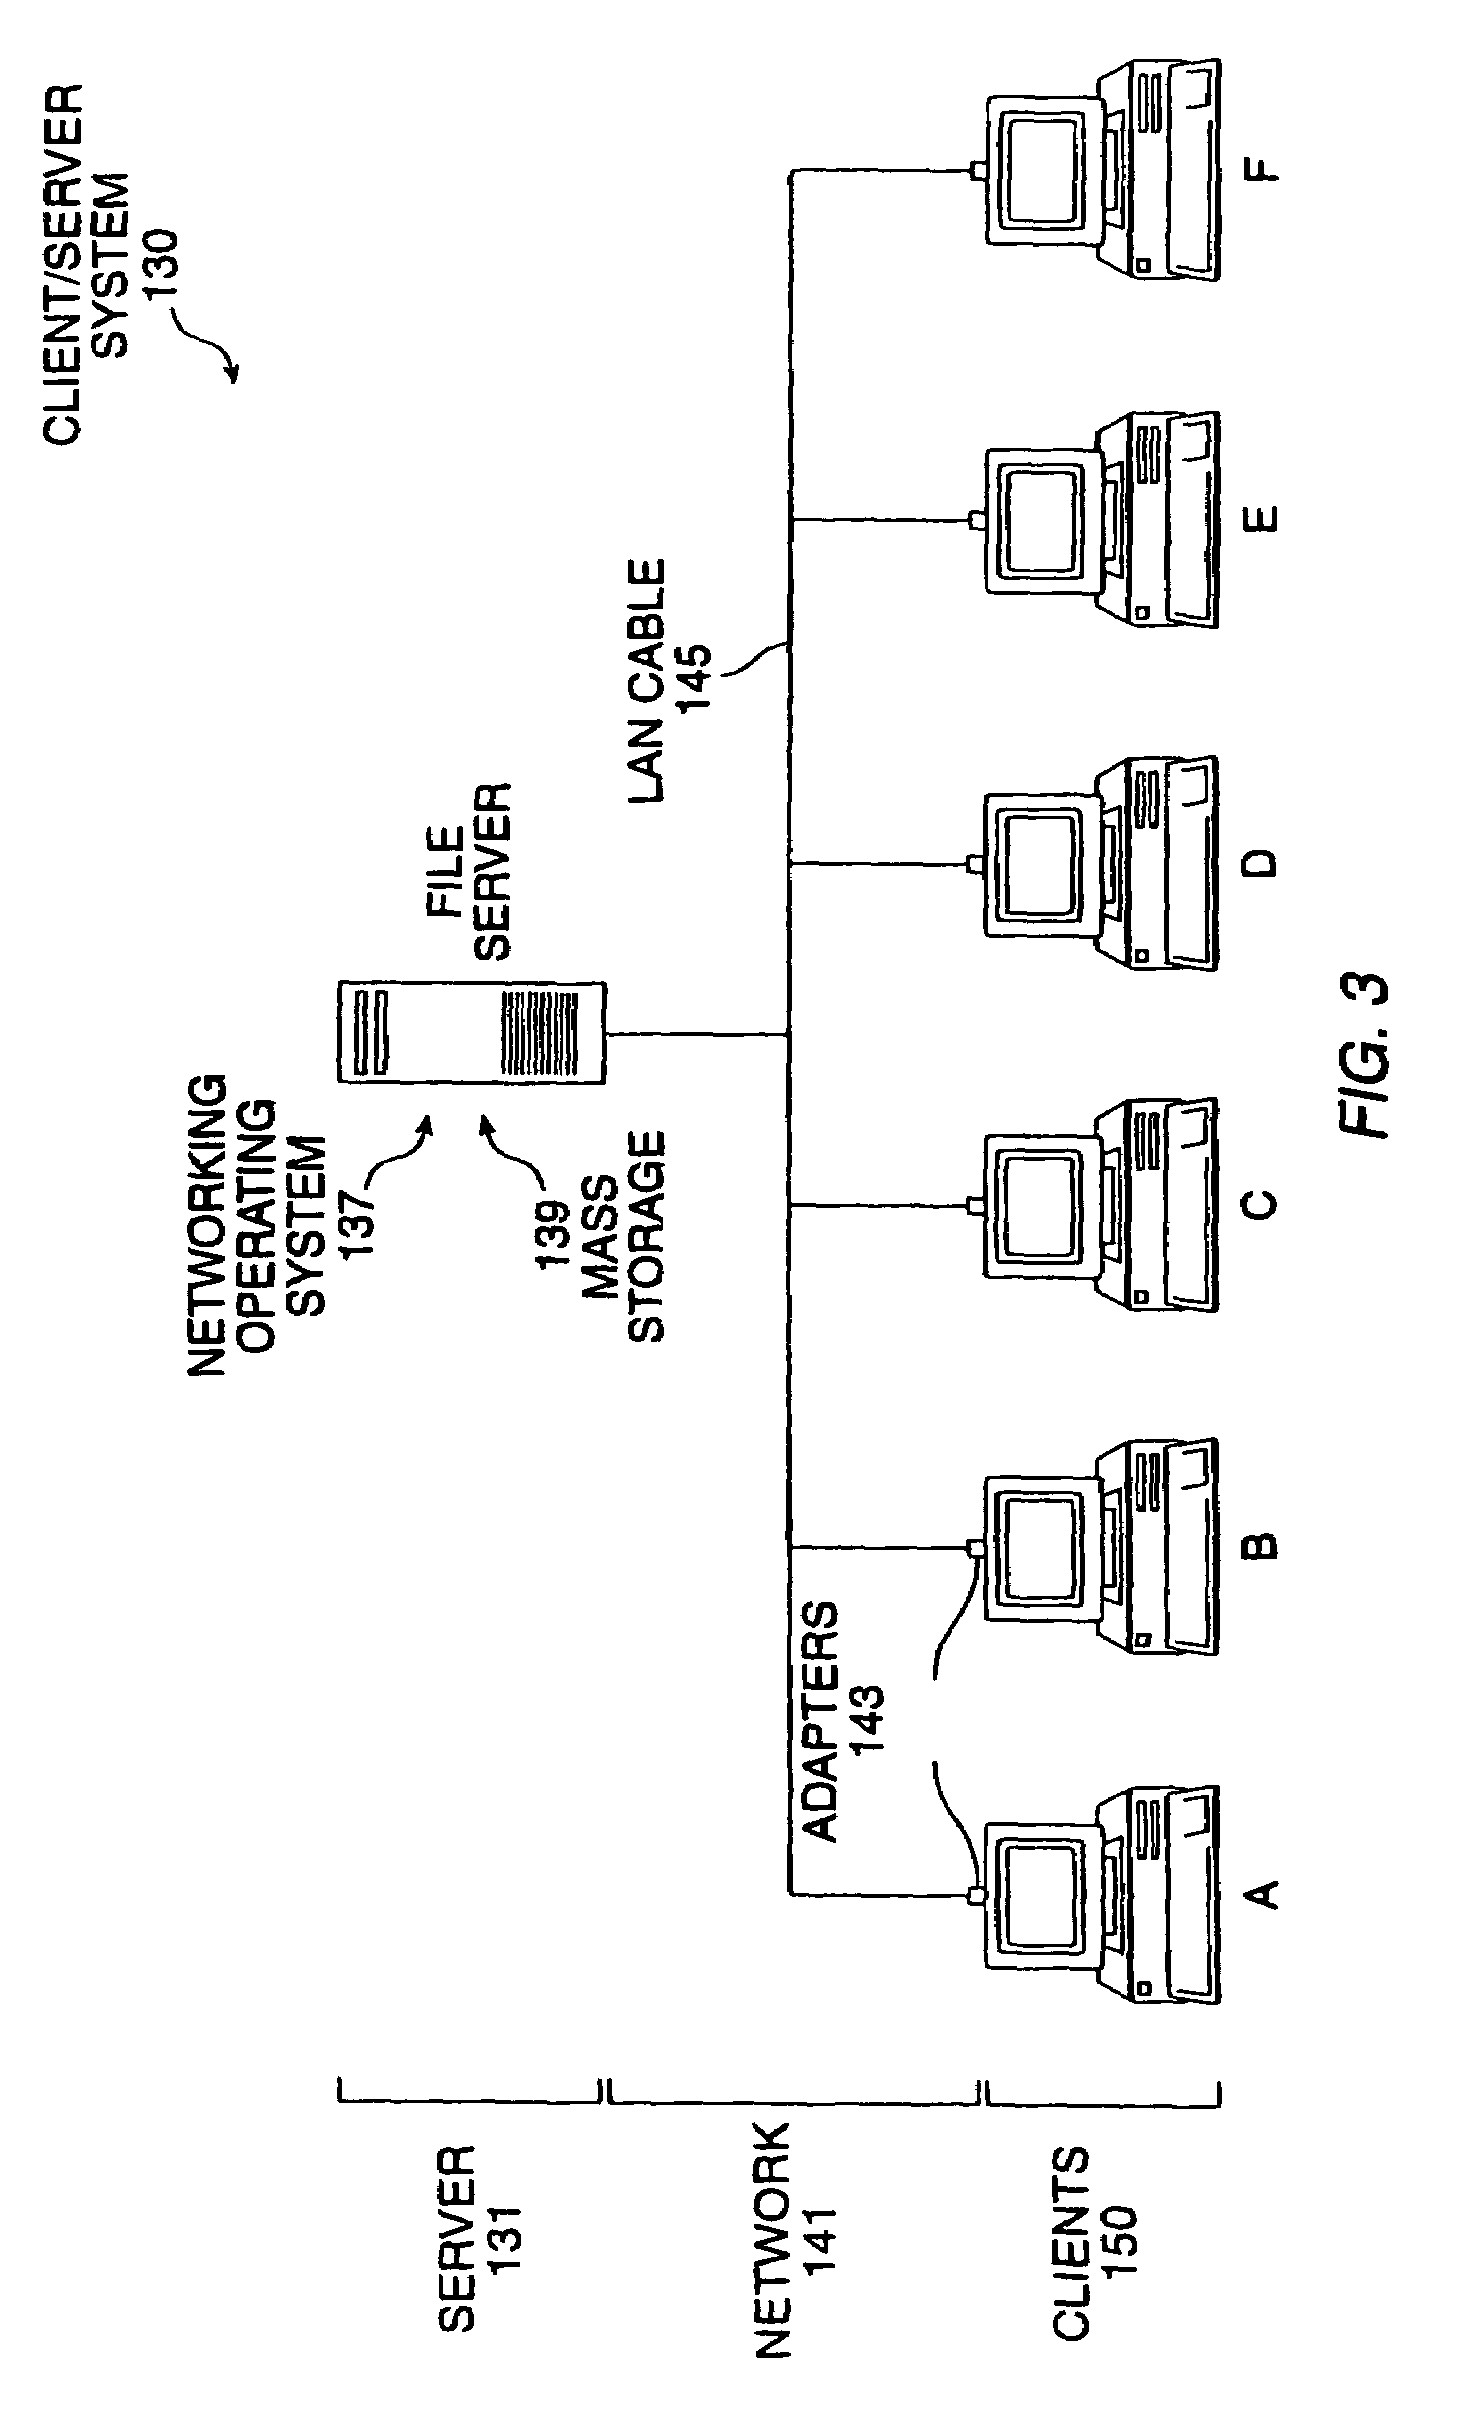 Load test system and method